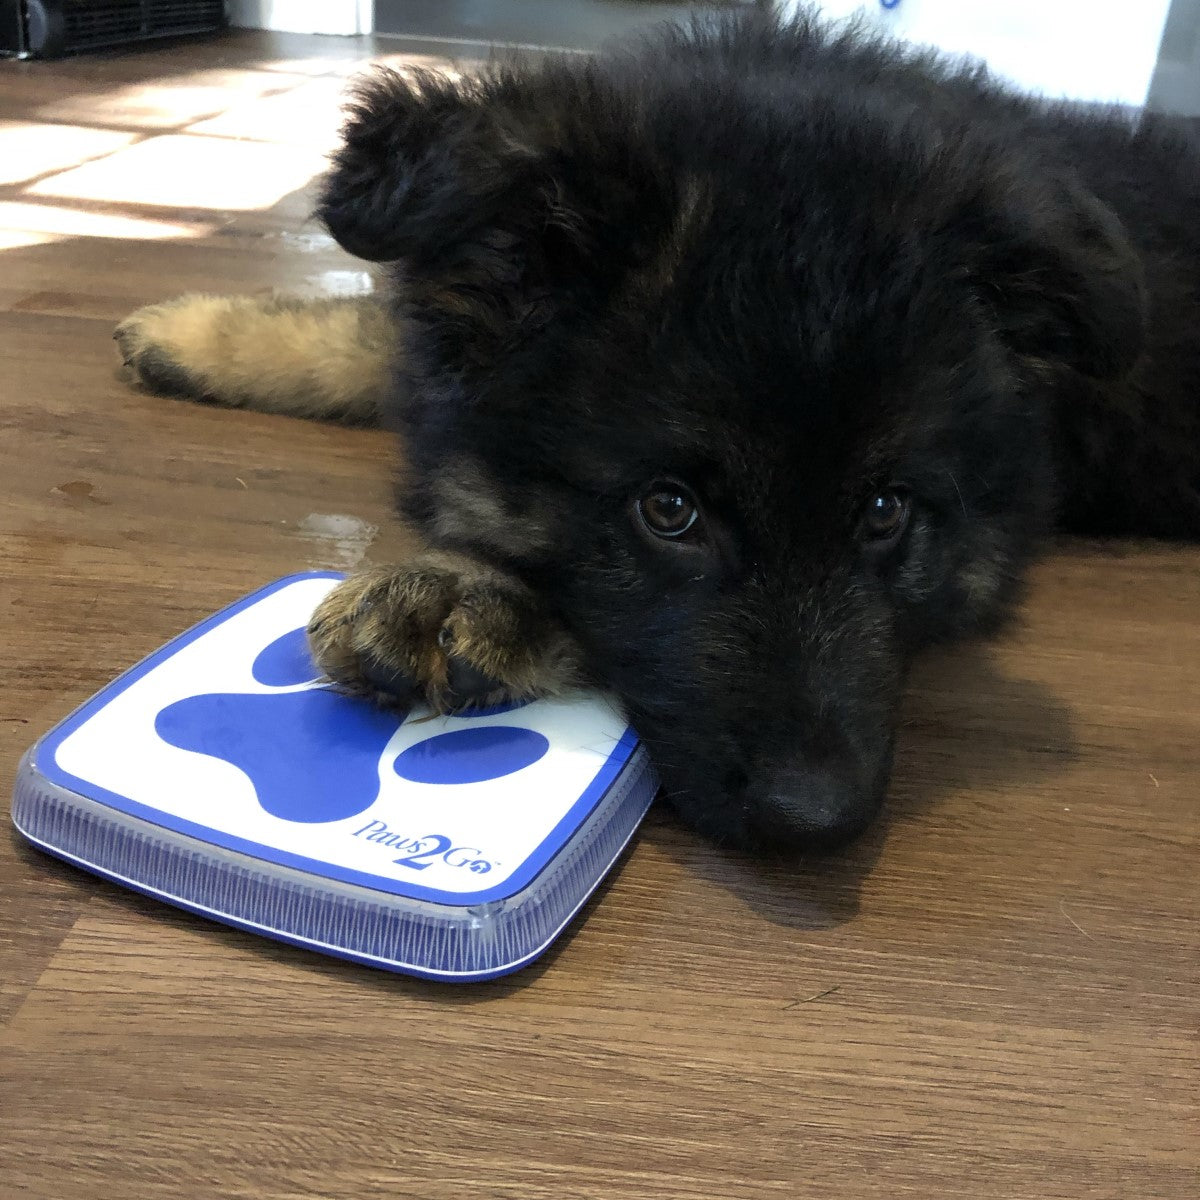 Dog laying next to Paws2Go wireless doggie doorbell